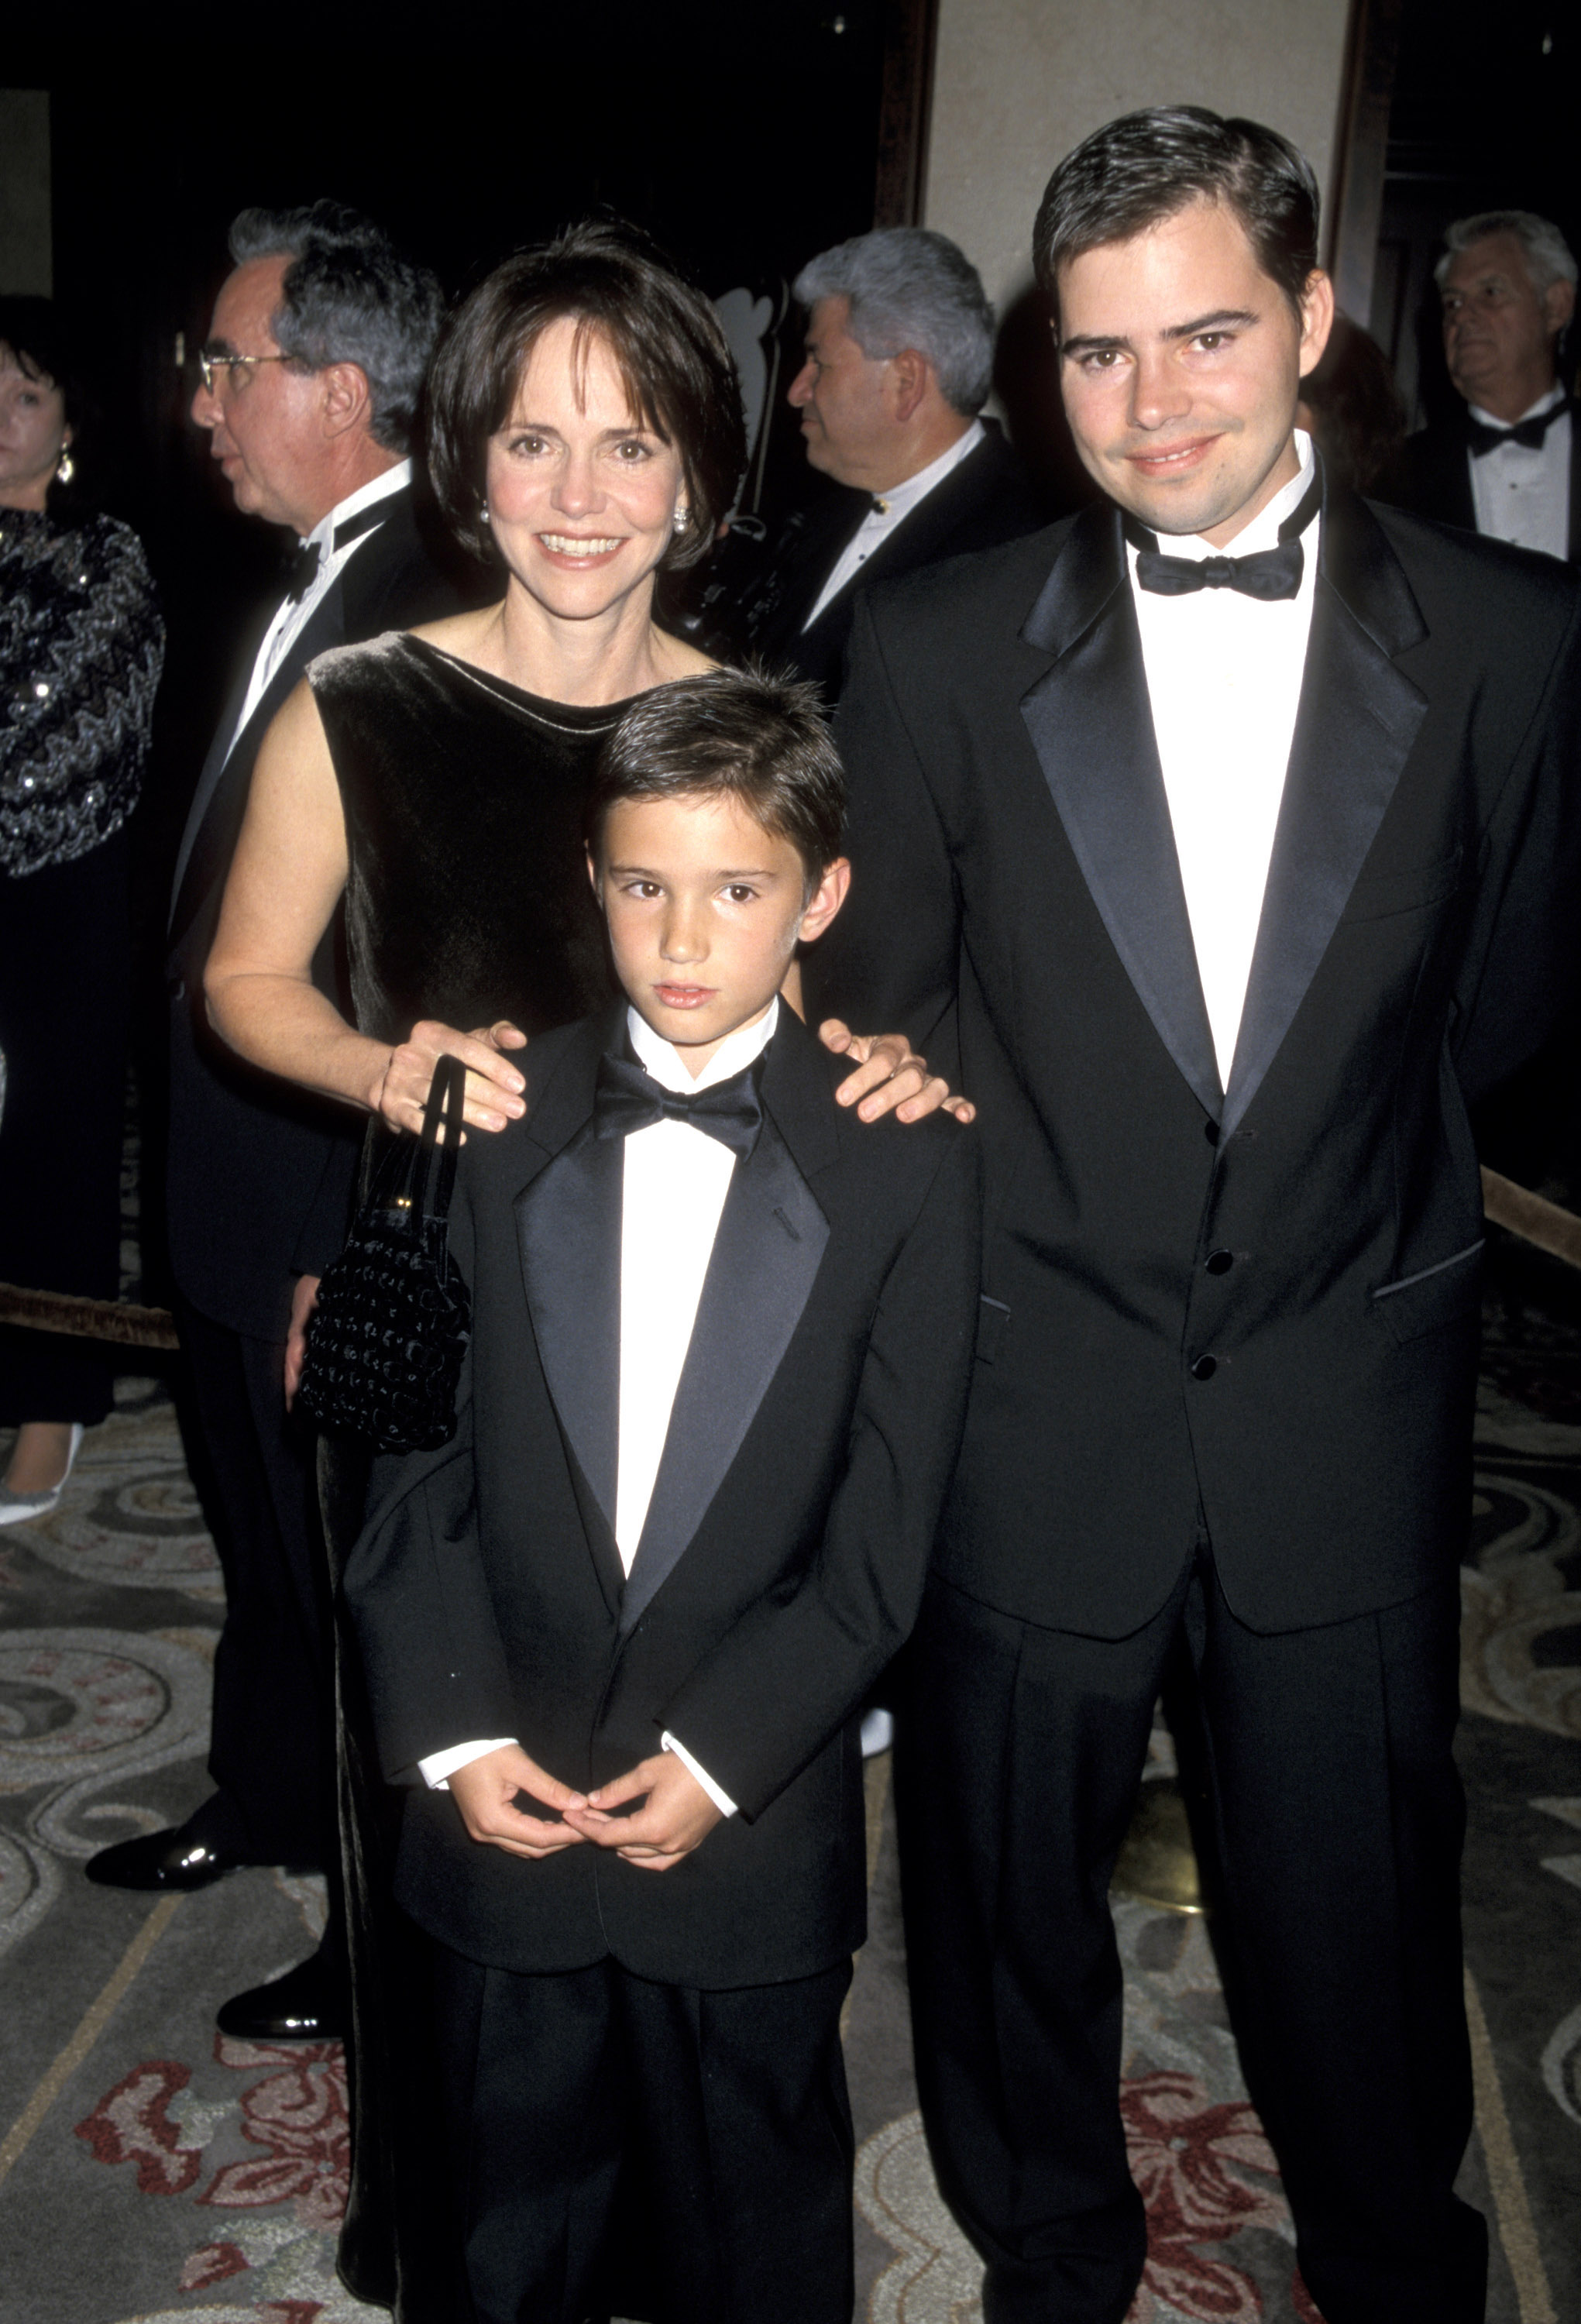 Sally Field, Samuel Greisman and Peter Craig at the 43rd Annual Thalians Ball in 1998. | Source: Getty Images